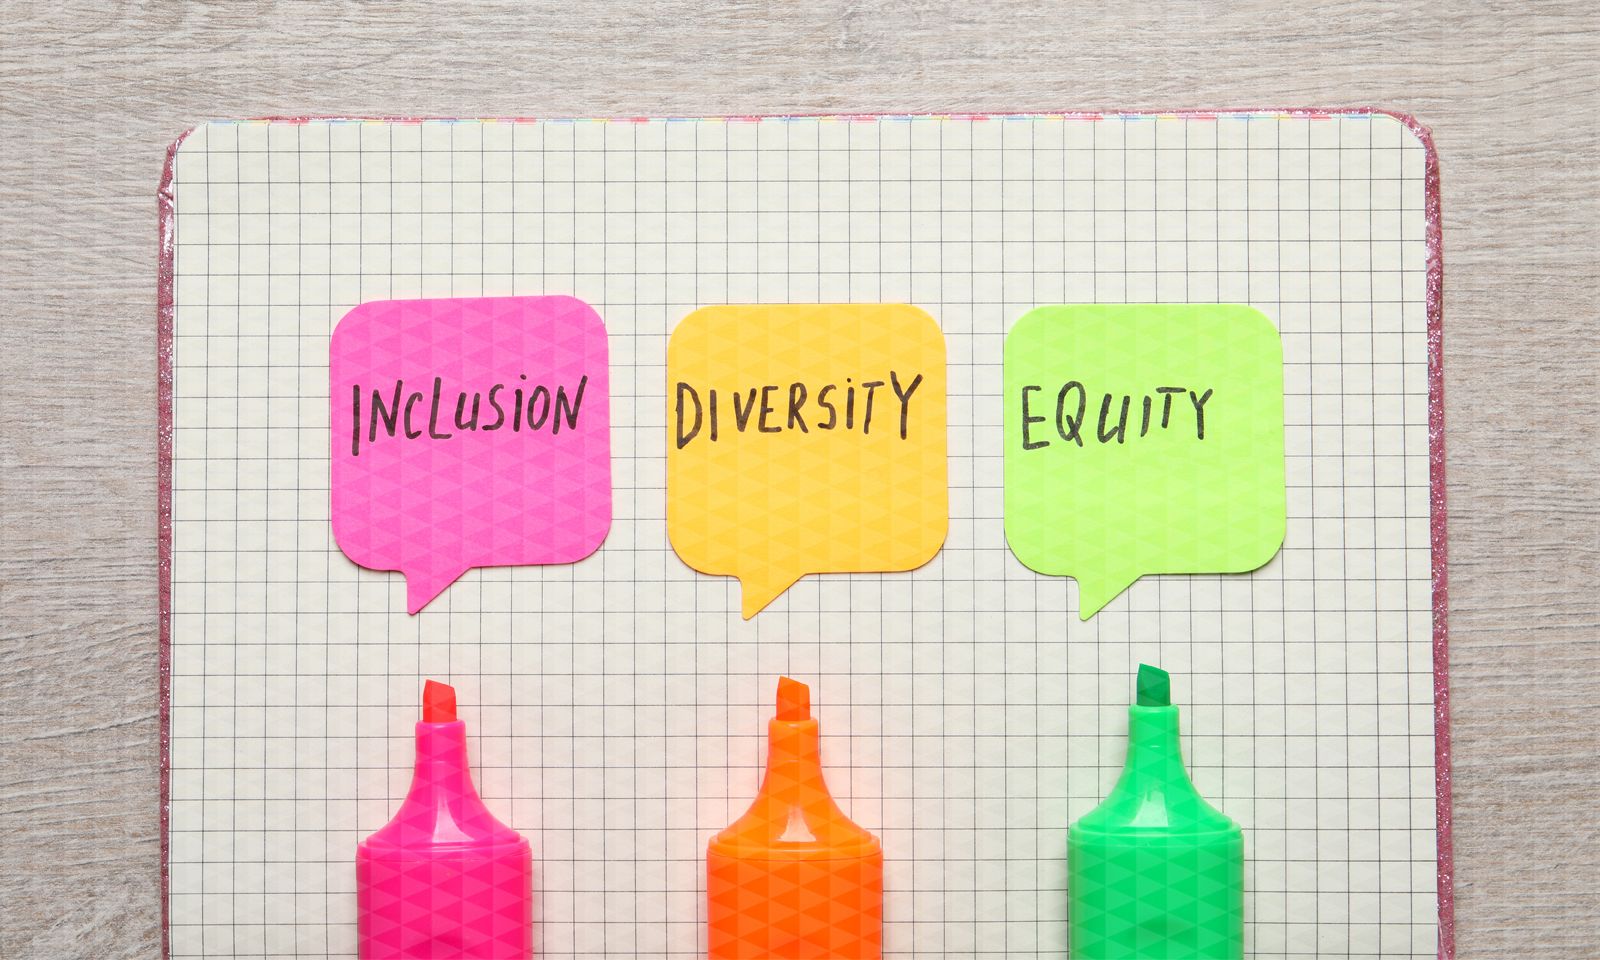 Measuring Diversity, Equity and Inclusion in Your Organization